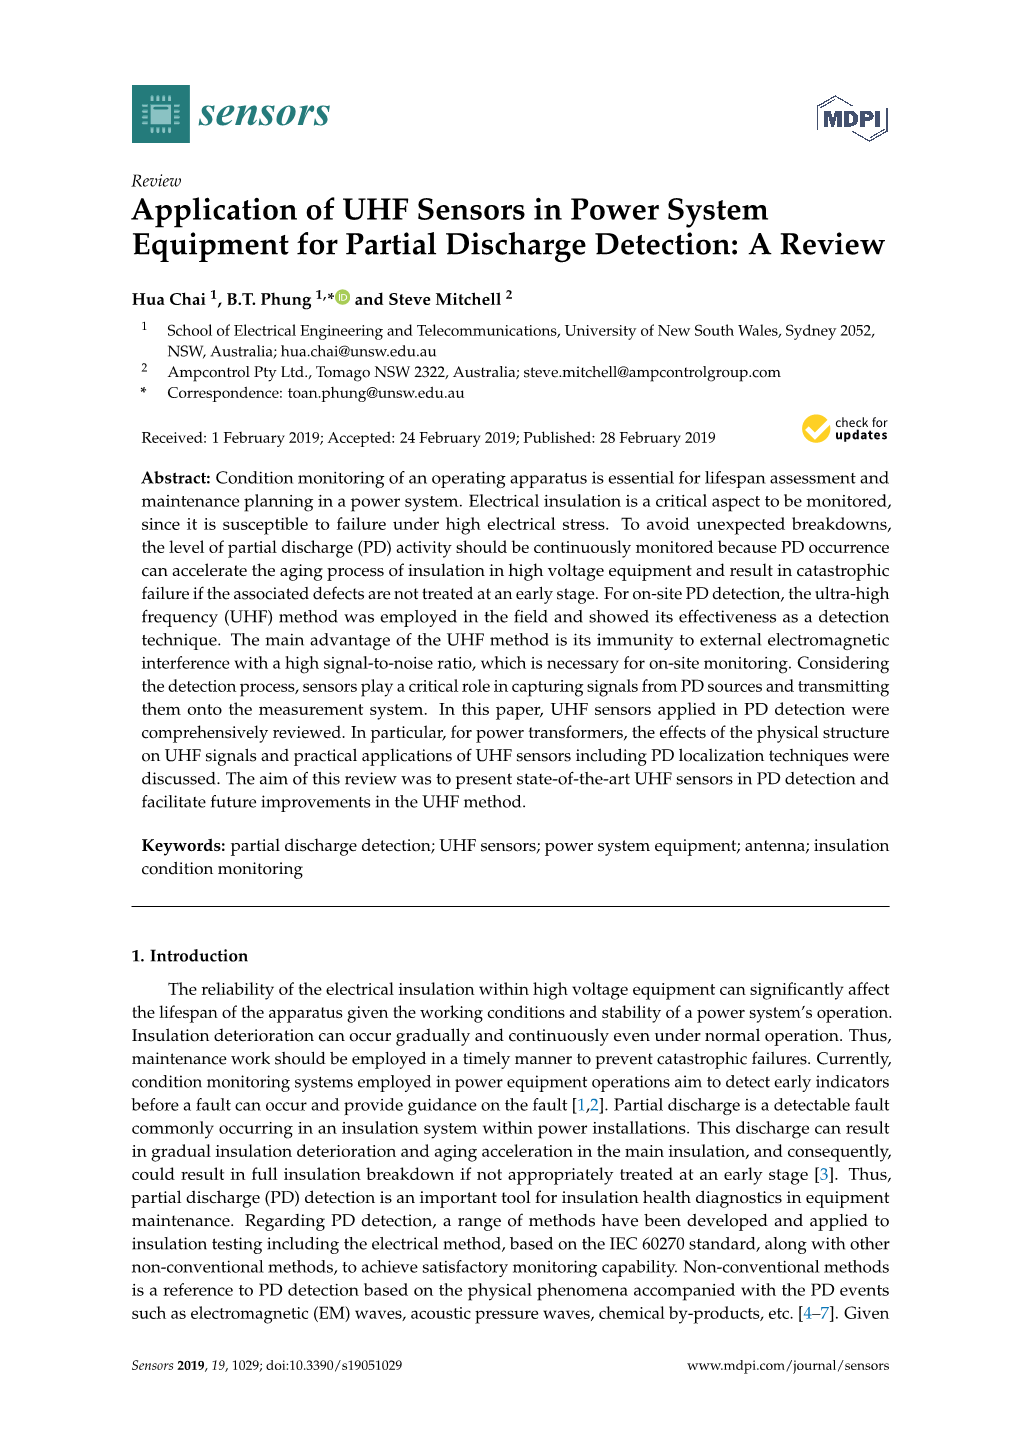 Application of UHF Sensors in Power System Equipment for Partial Discharge Detection: a Review